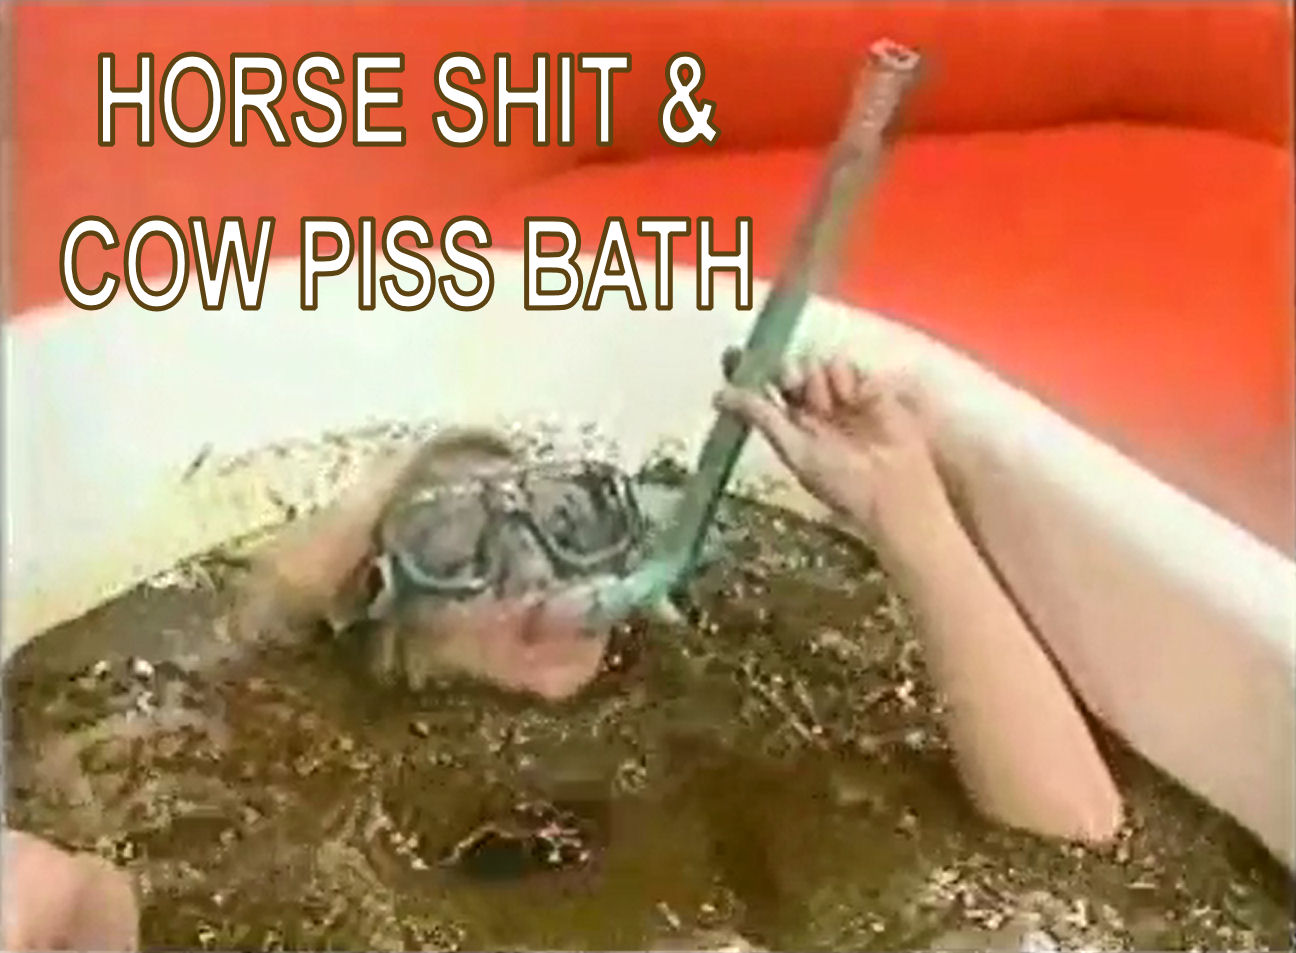 Horse Shit and Cow Piss Bath - 90s UK TV